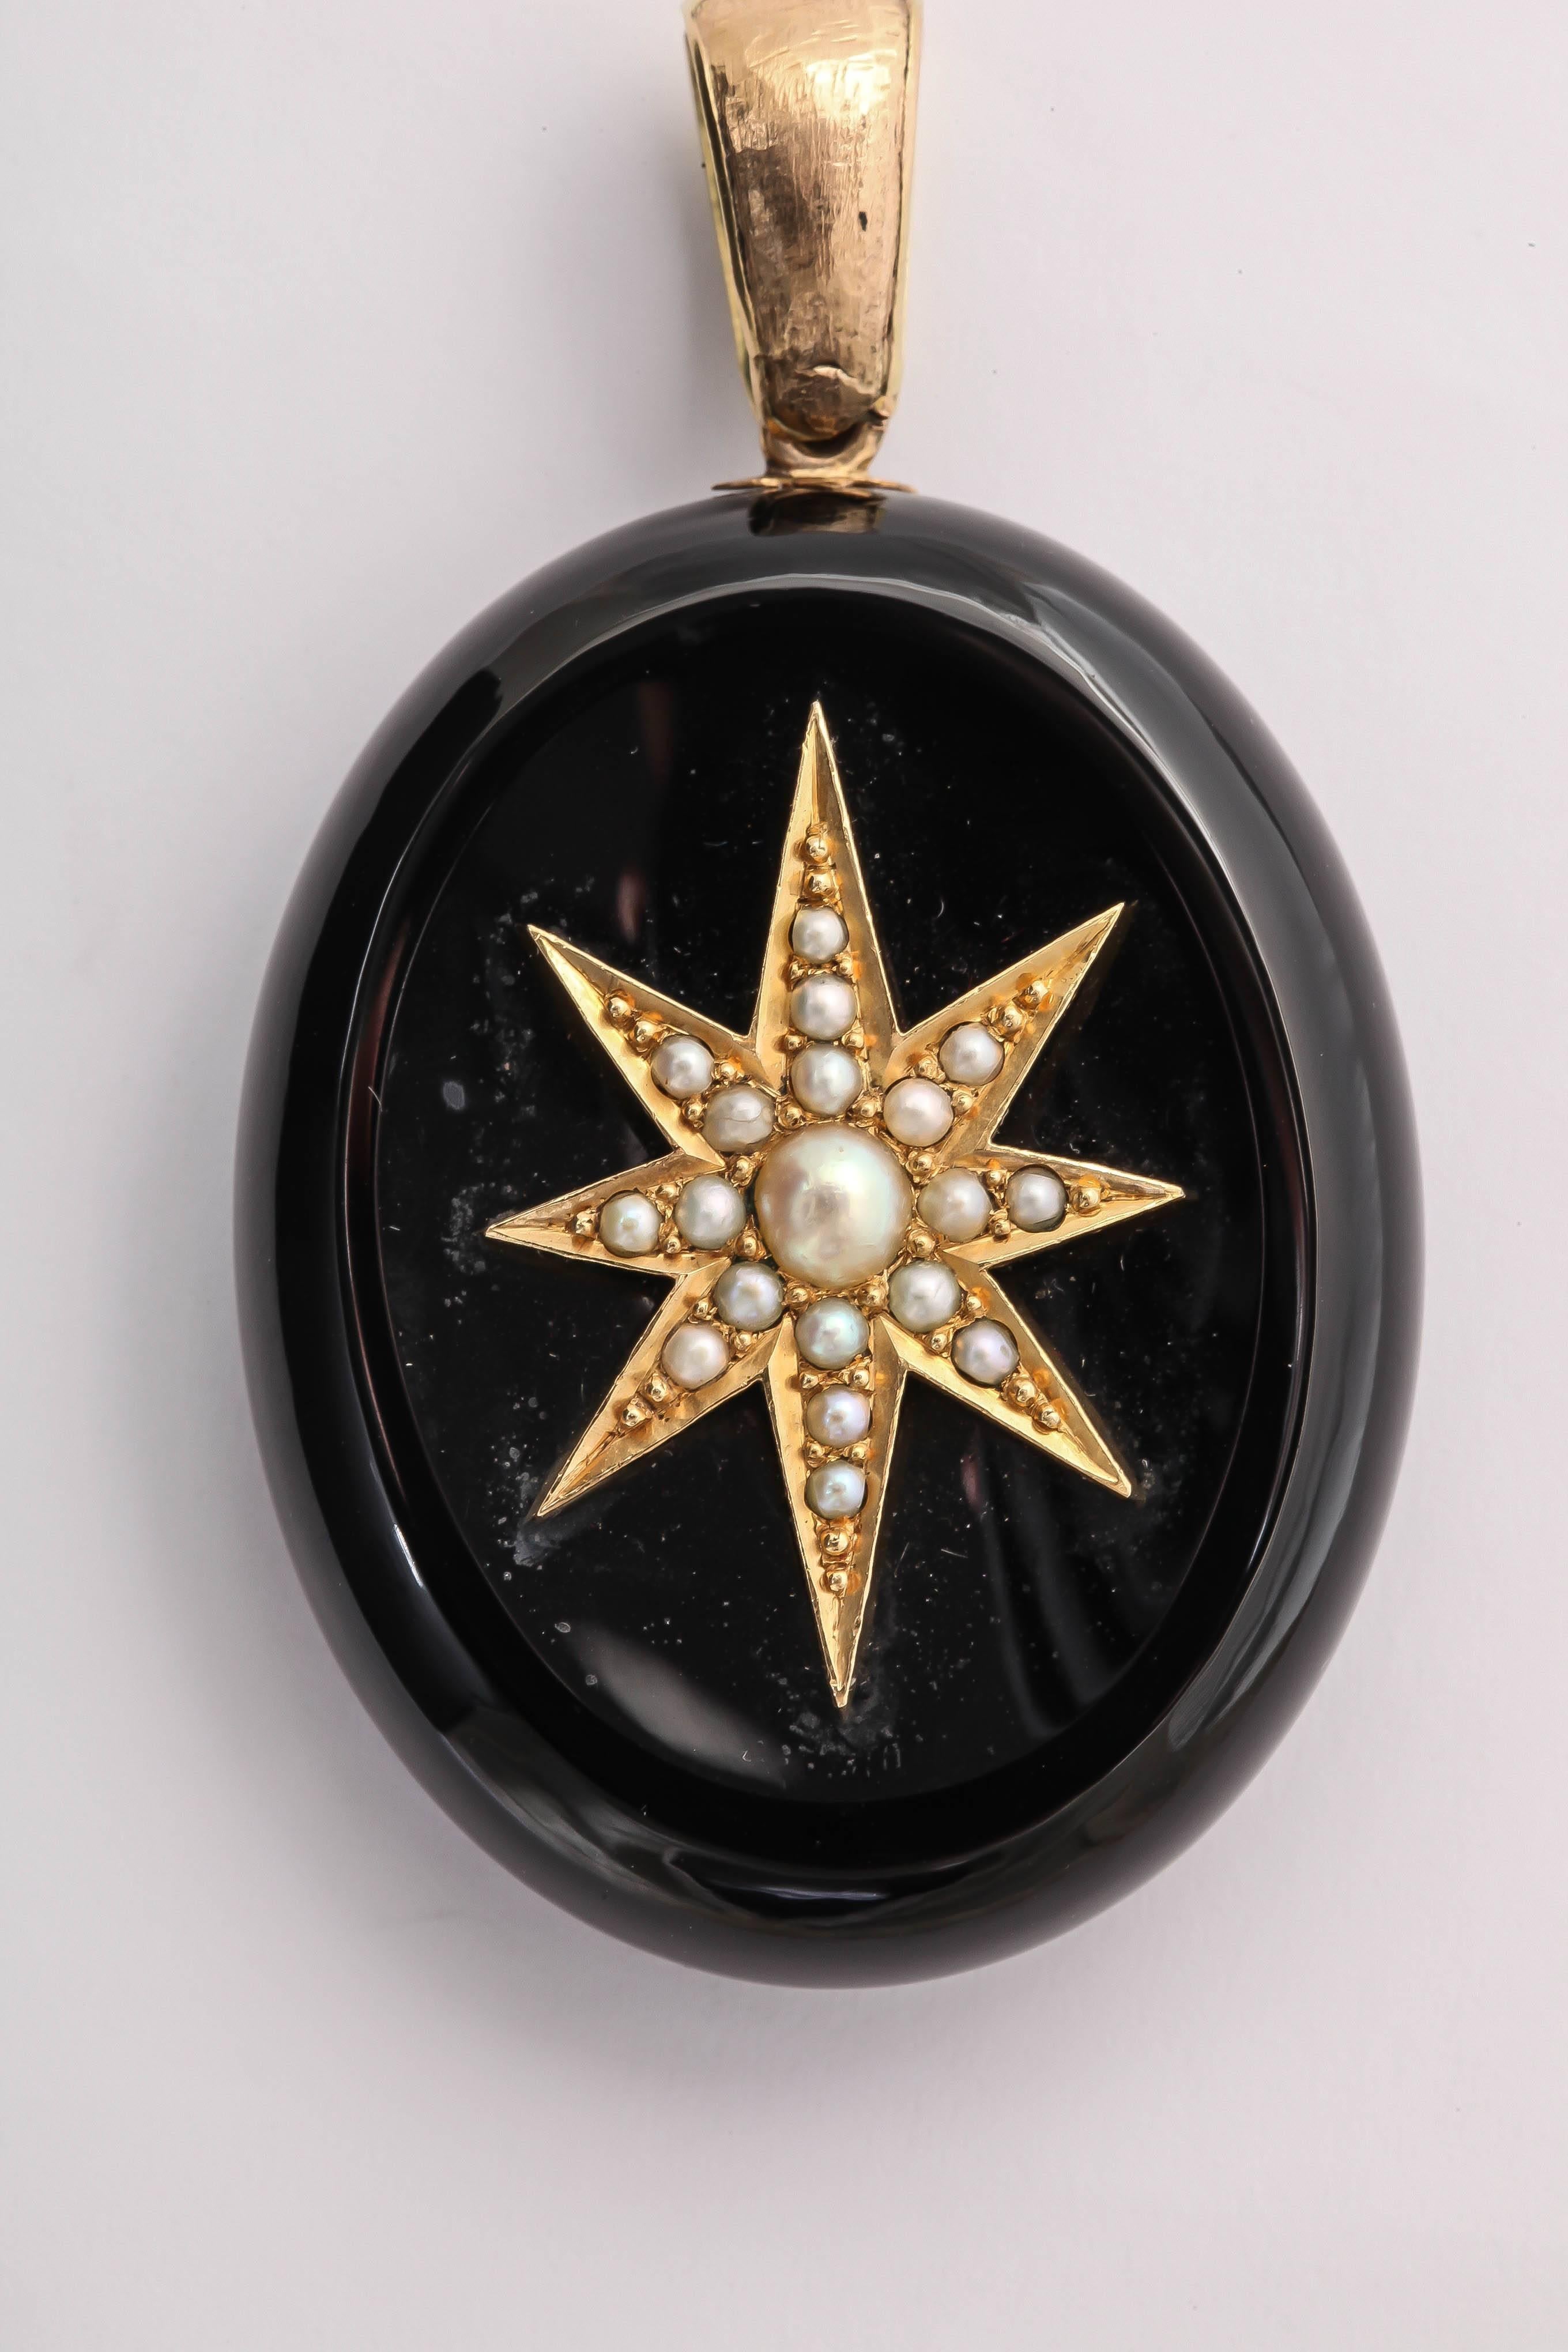 The starburst design on the front of the locket was a common design used in the Victorian era. This locket is Jet, yellow gold, and set with seed pearls. The back side has a large locket compartment. 